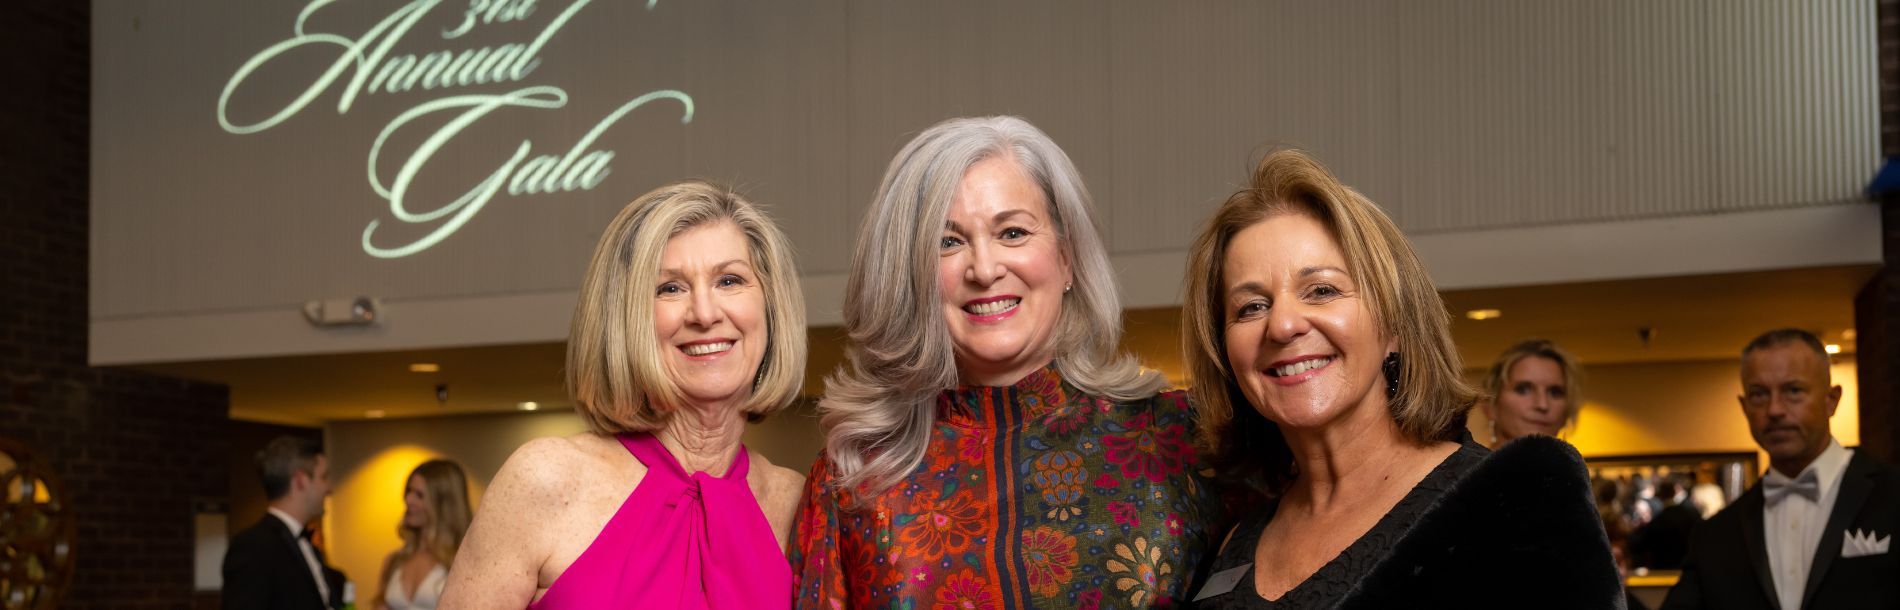 3 women smiling at a gala event.